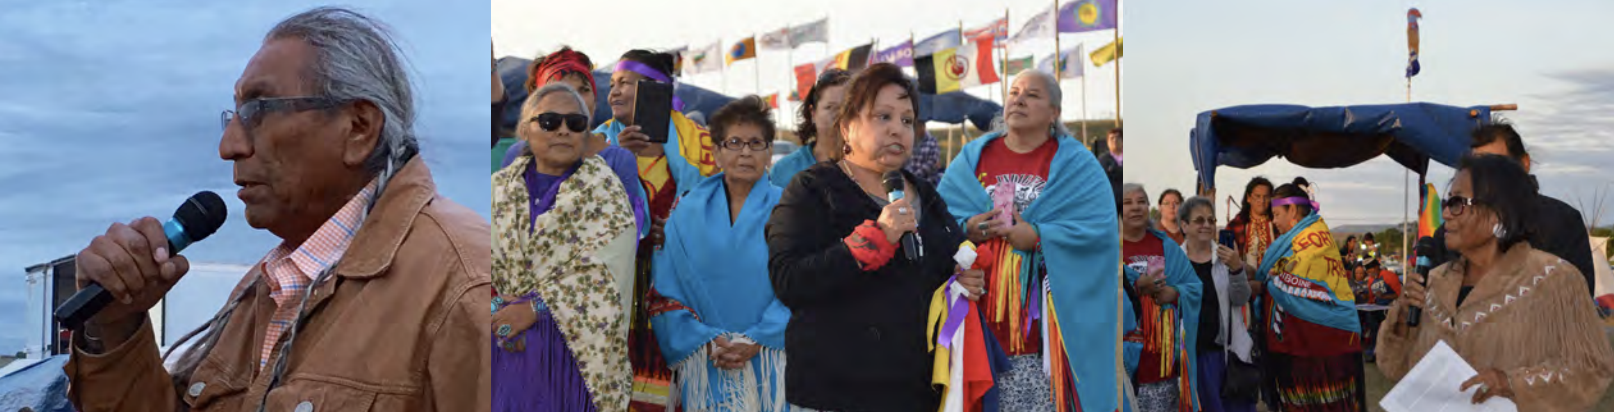 "Three pictures stitched together, each showing a different Native person speaking into a microphone to a crowd"